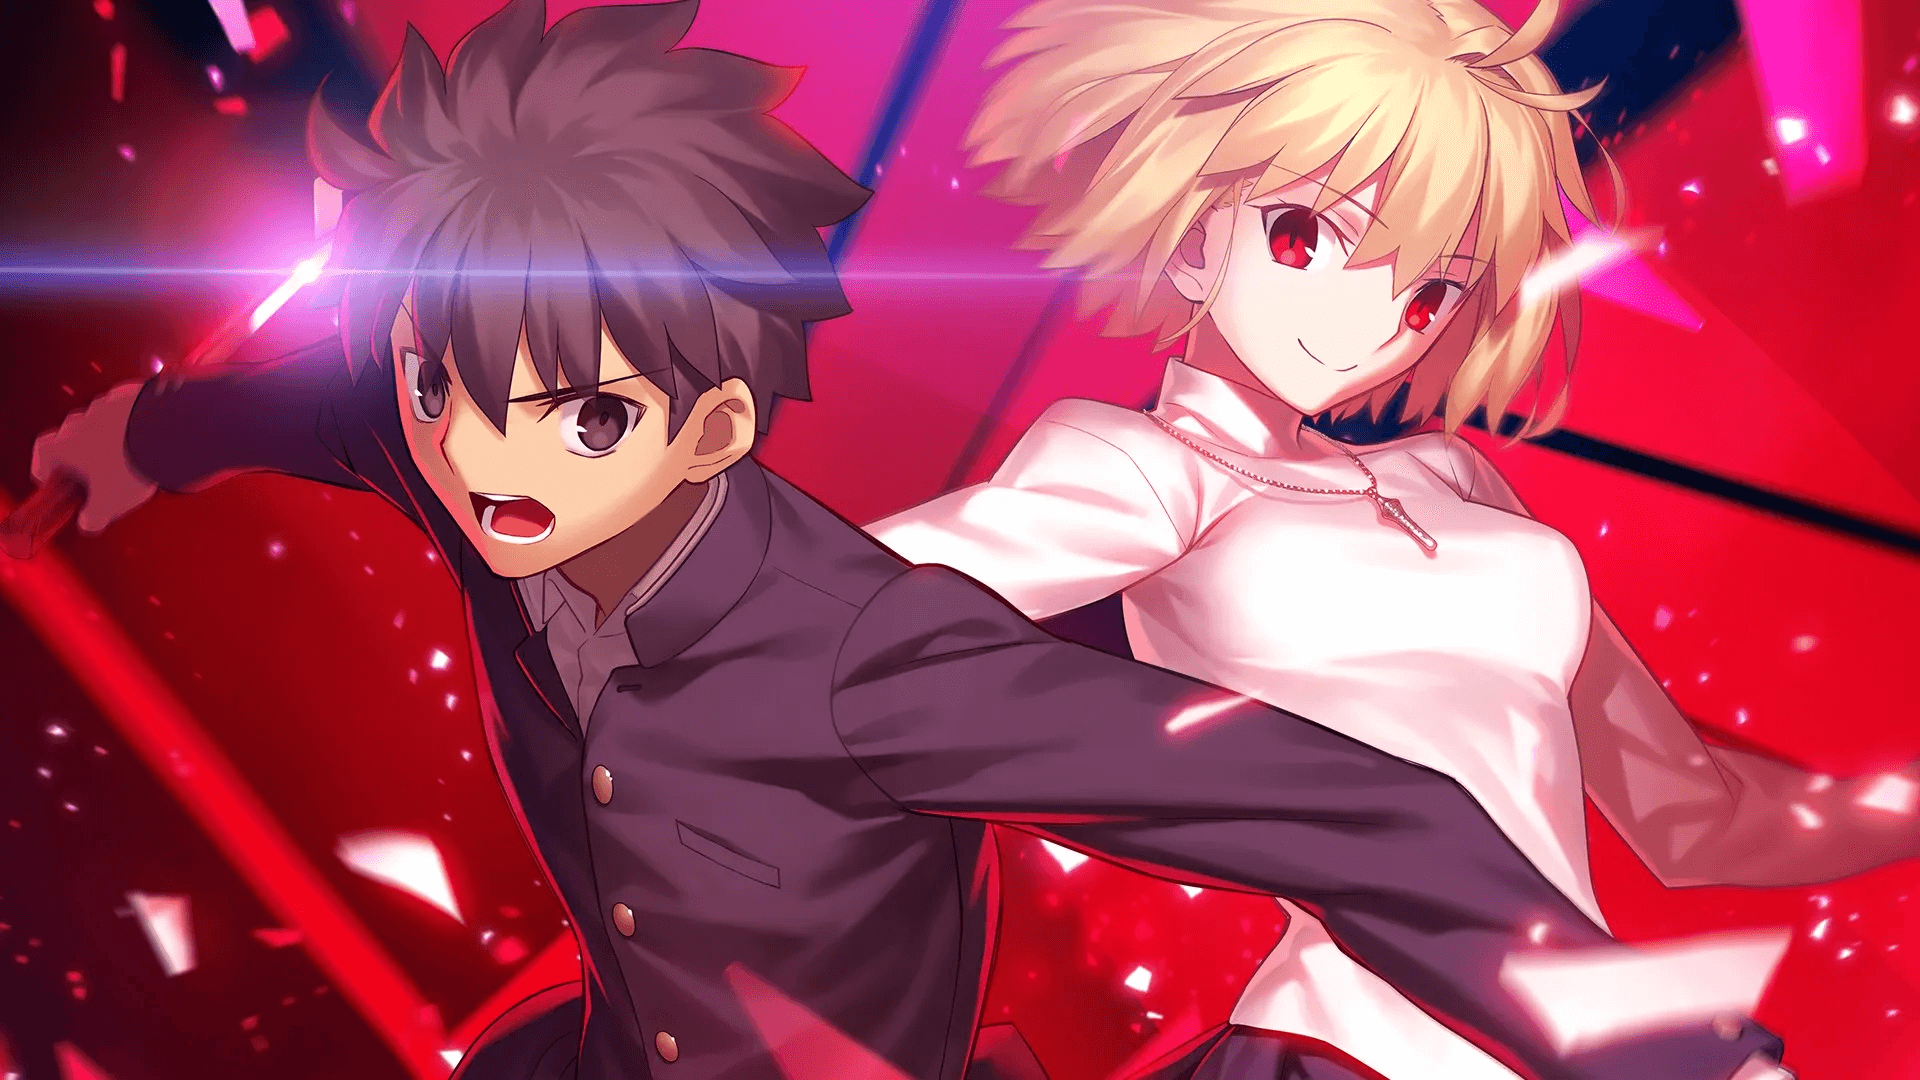 More Content Coming to Melty Blood: Type Lumina